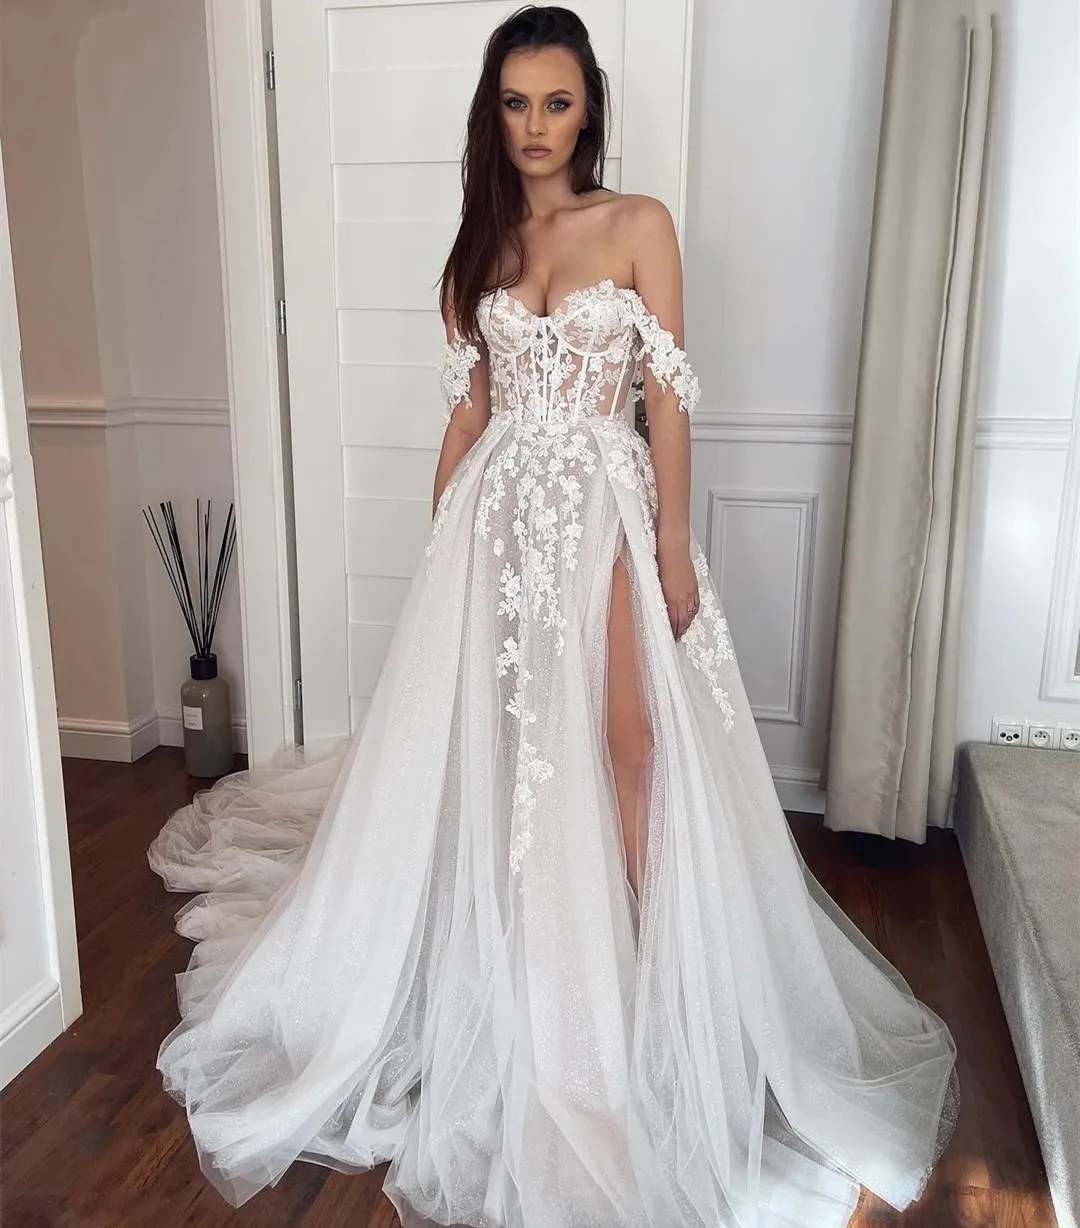 2023 Sexy Bobemian A Line Wedding Dresses Off Shoulder Appliques Lace Tulle Short Sleeves Sheer Top Mermaid Bridal Gowns High Side Split Overskirts